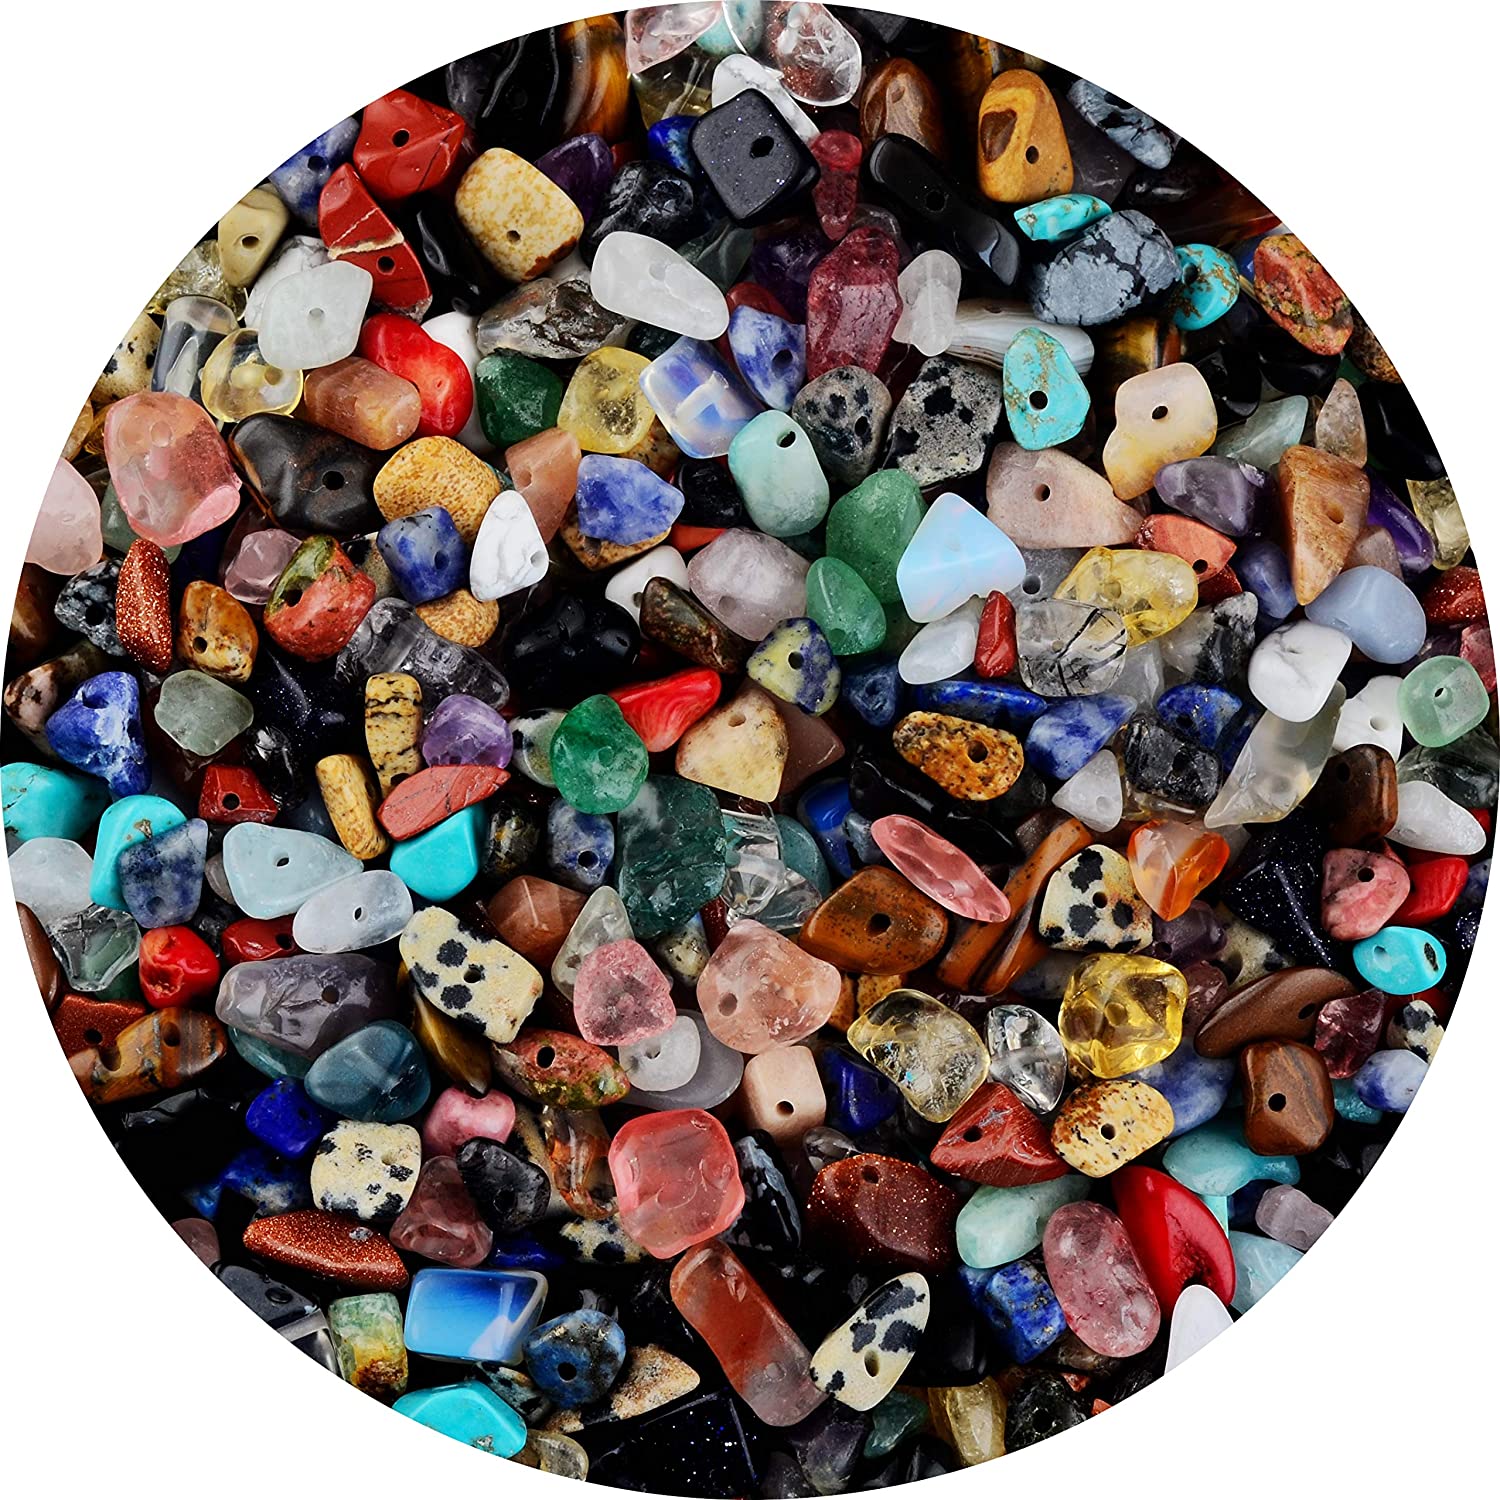  Vilihkc Natural Chip Stone Beads 24 Colors 1200 Pieces  Irregular Gemstones Healing Crystal Loose Rocks Bead Hole Drilled DIY for  Bracelet Jewelry Making Crafting (4-8mm)